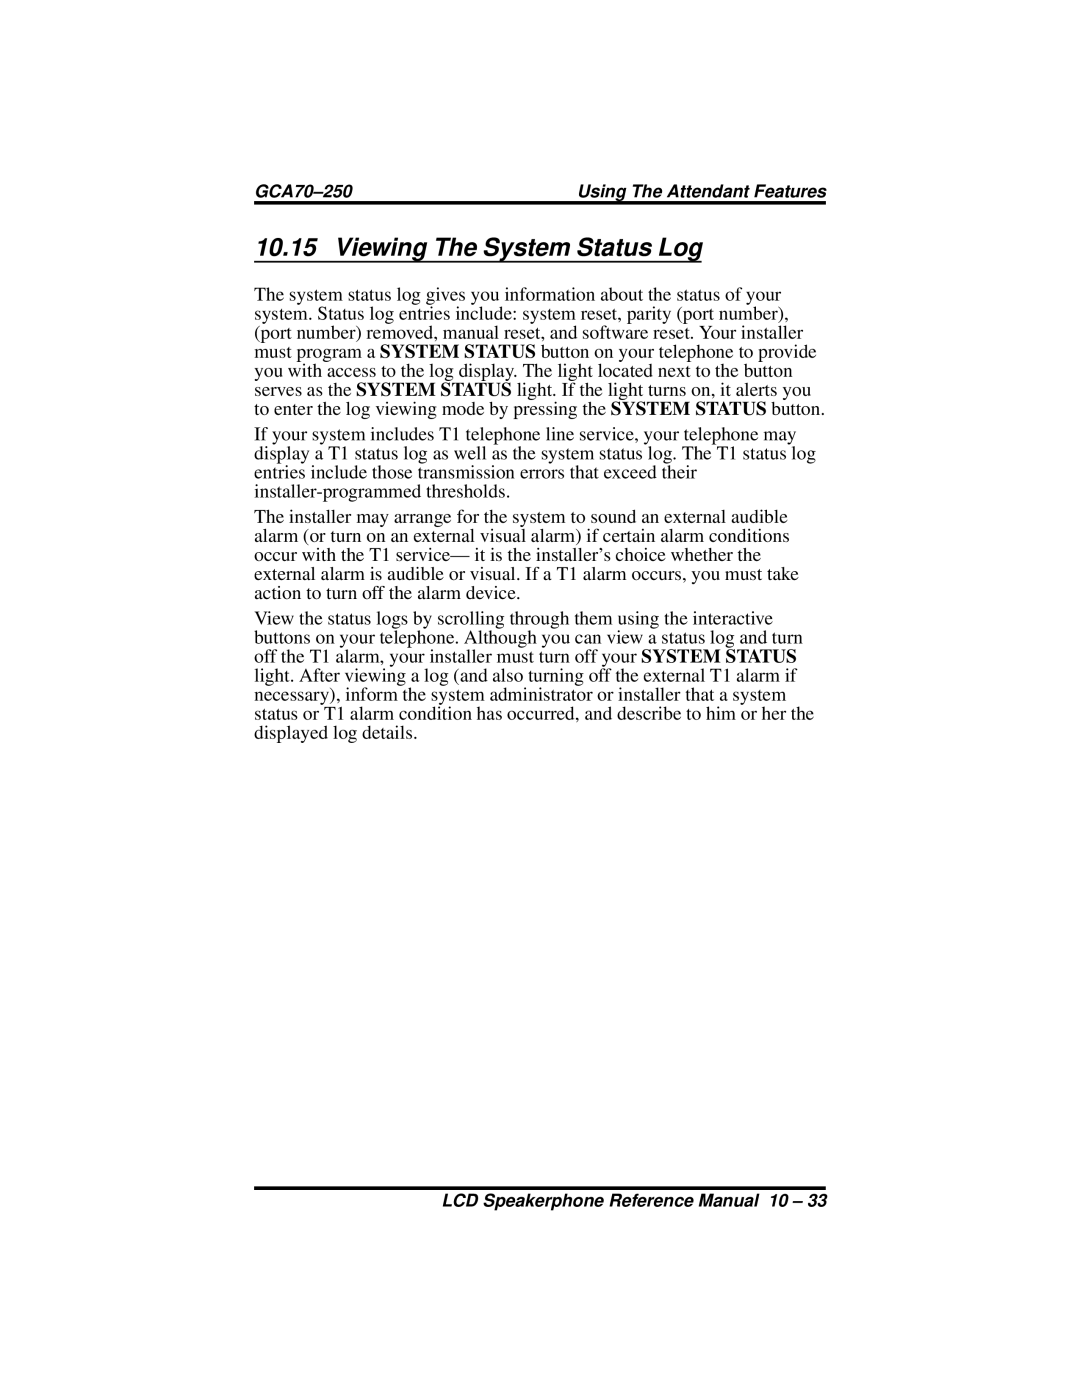 Vertical Communications 8324F, 8312S, 8324S manual Viewing The System Status Log 